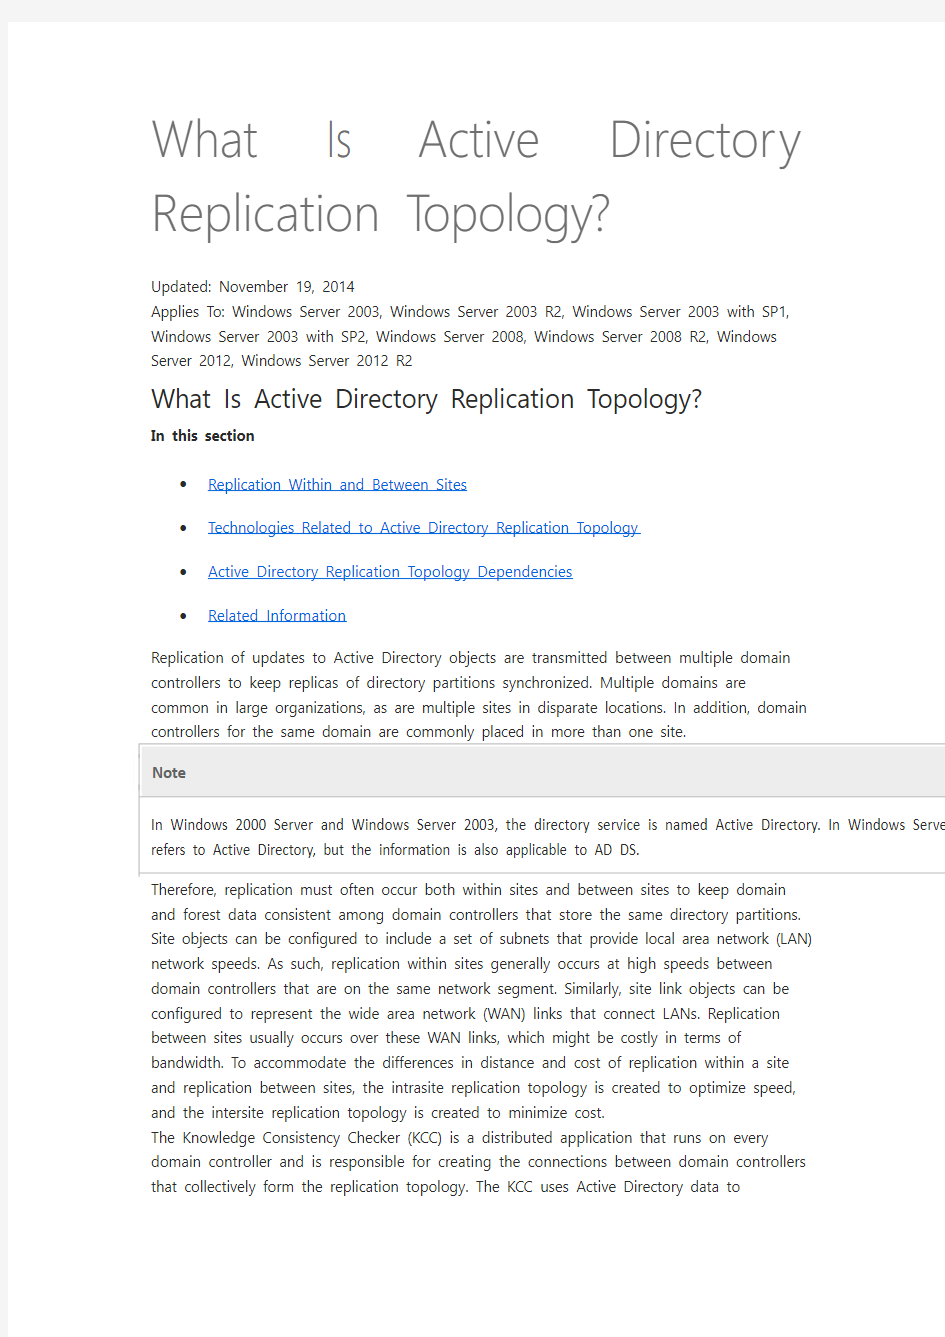 What Is Active Directory Replication Topology